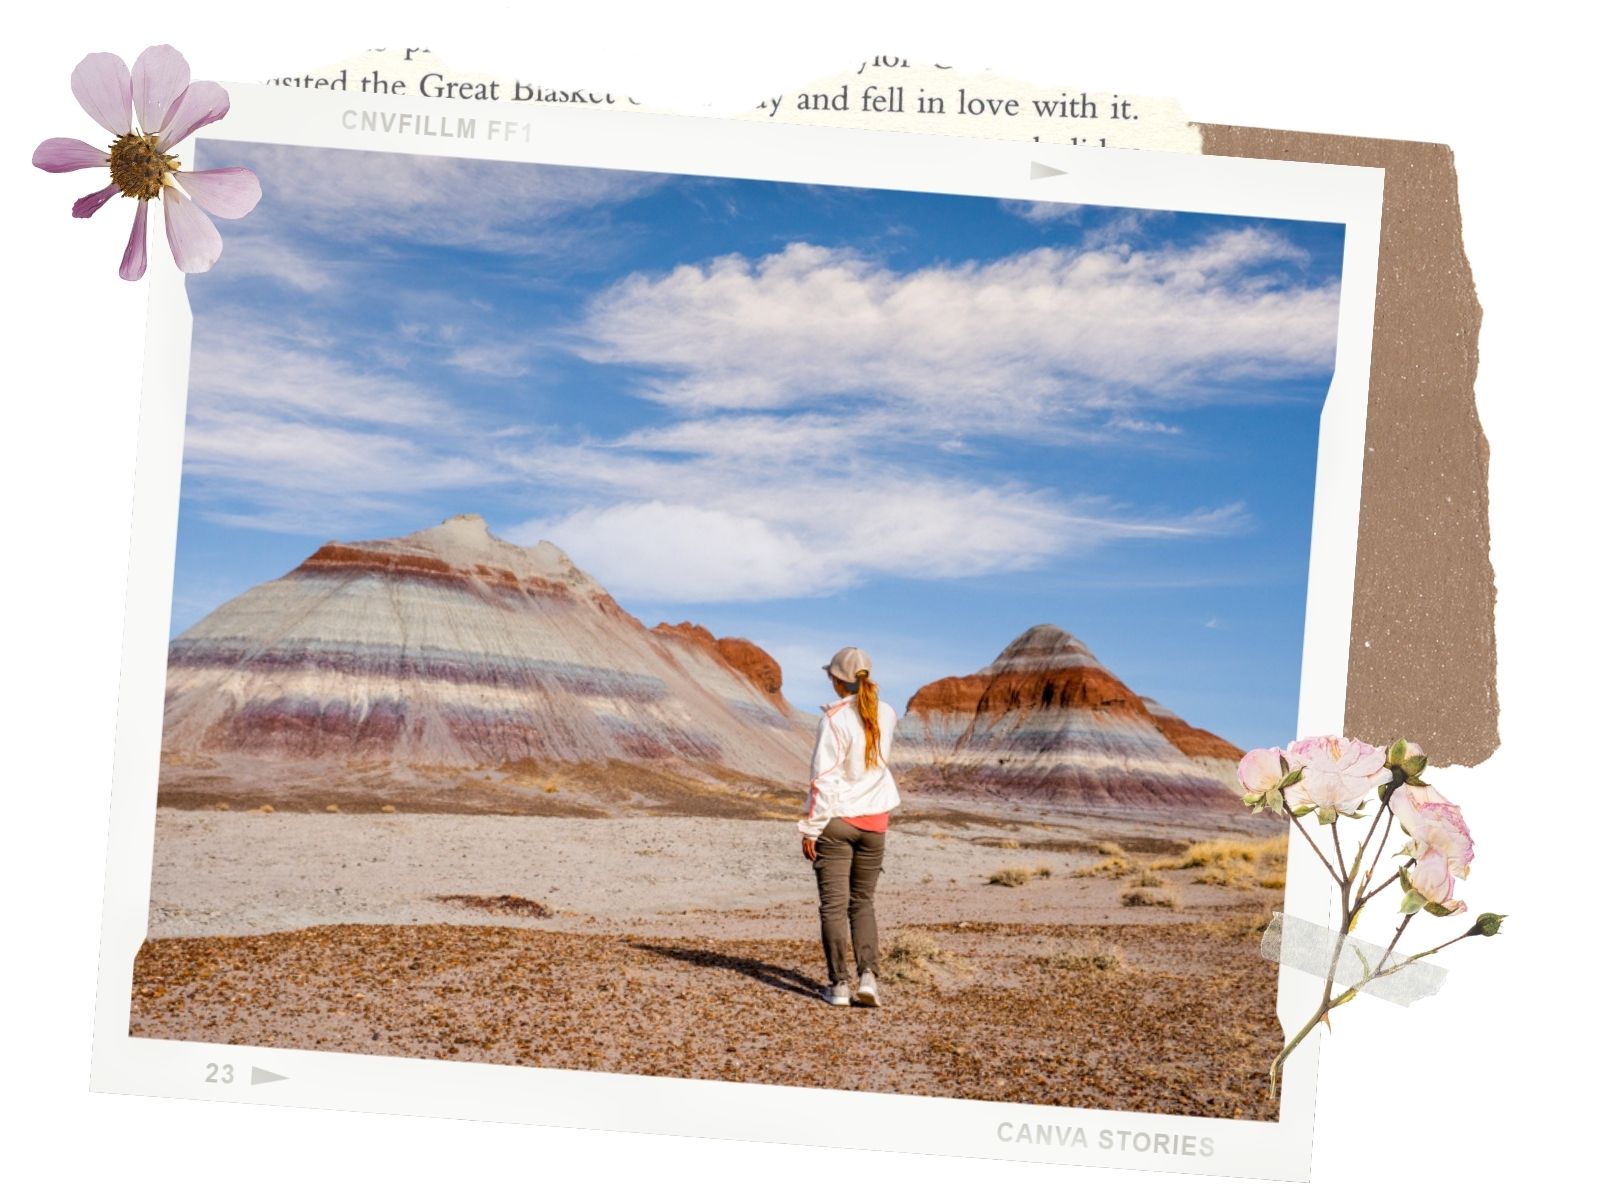 Petrified Forest National Park: The Teepees